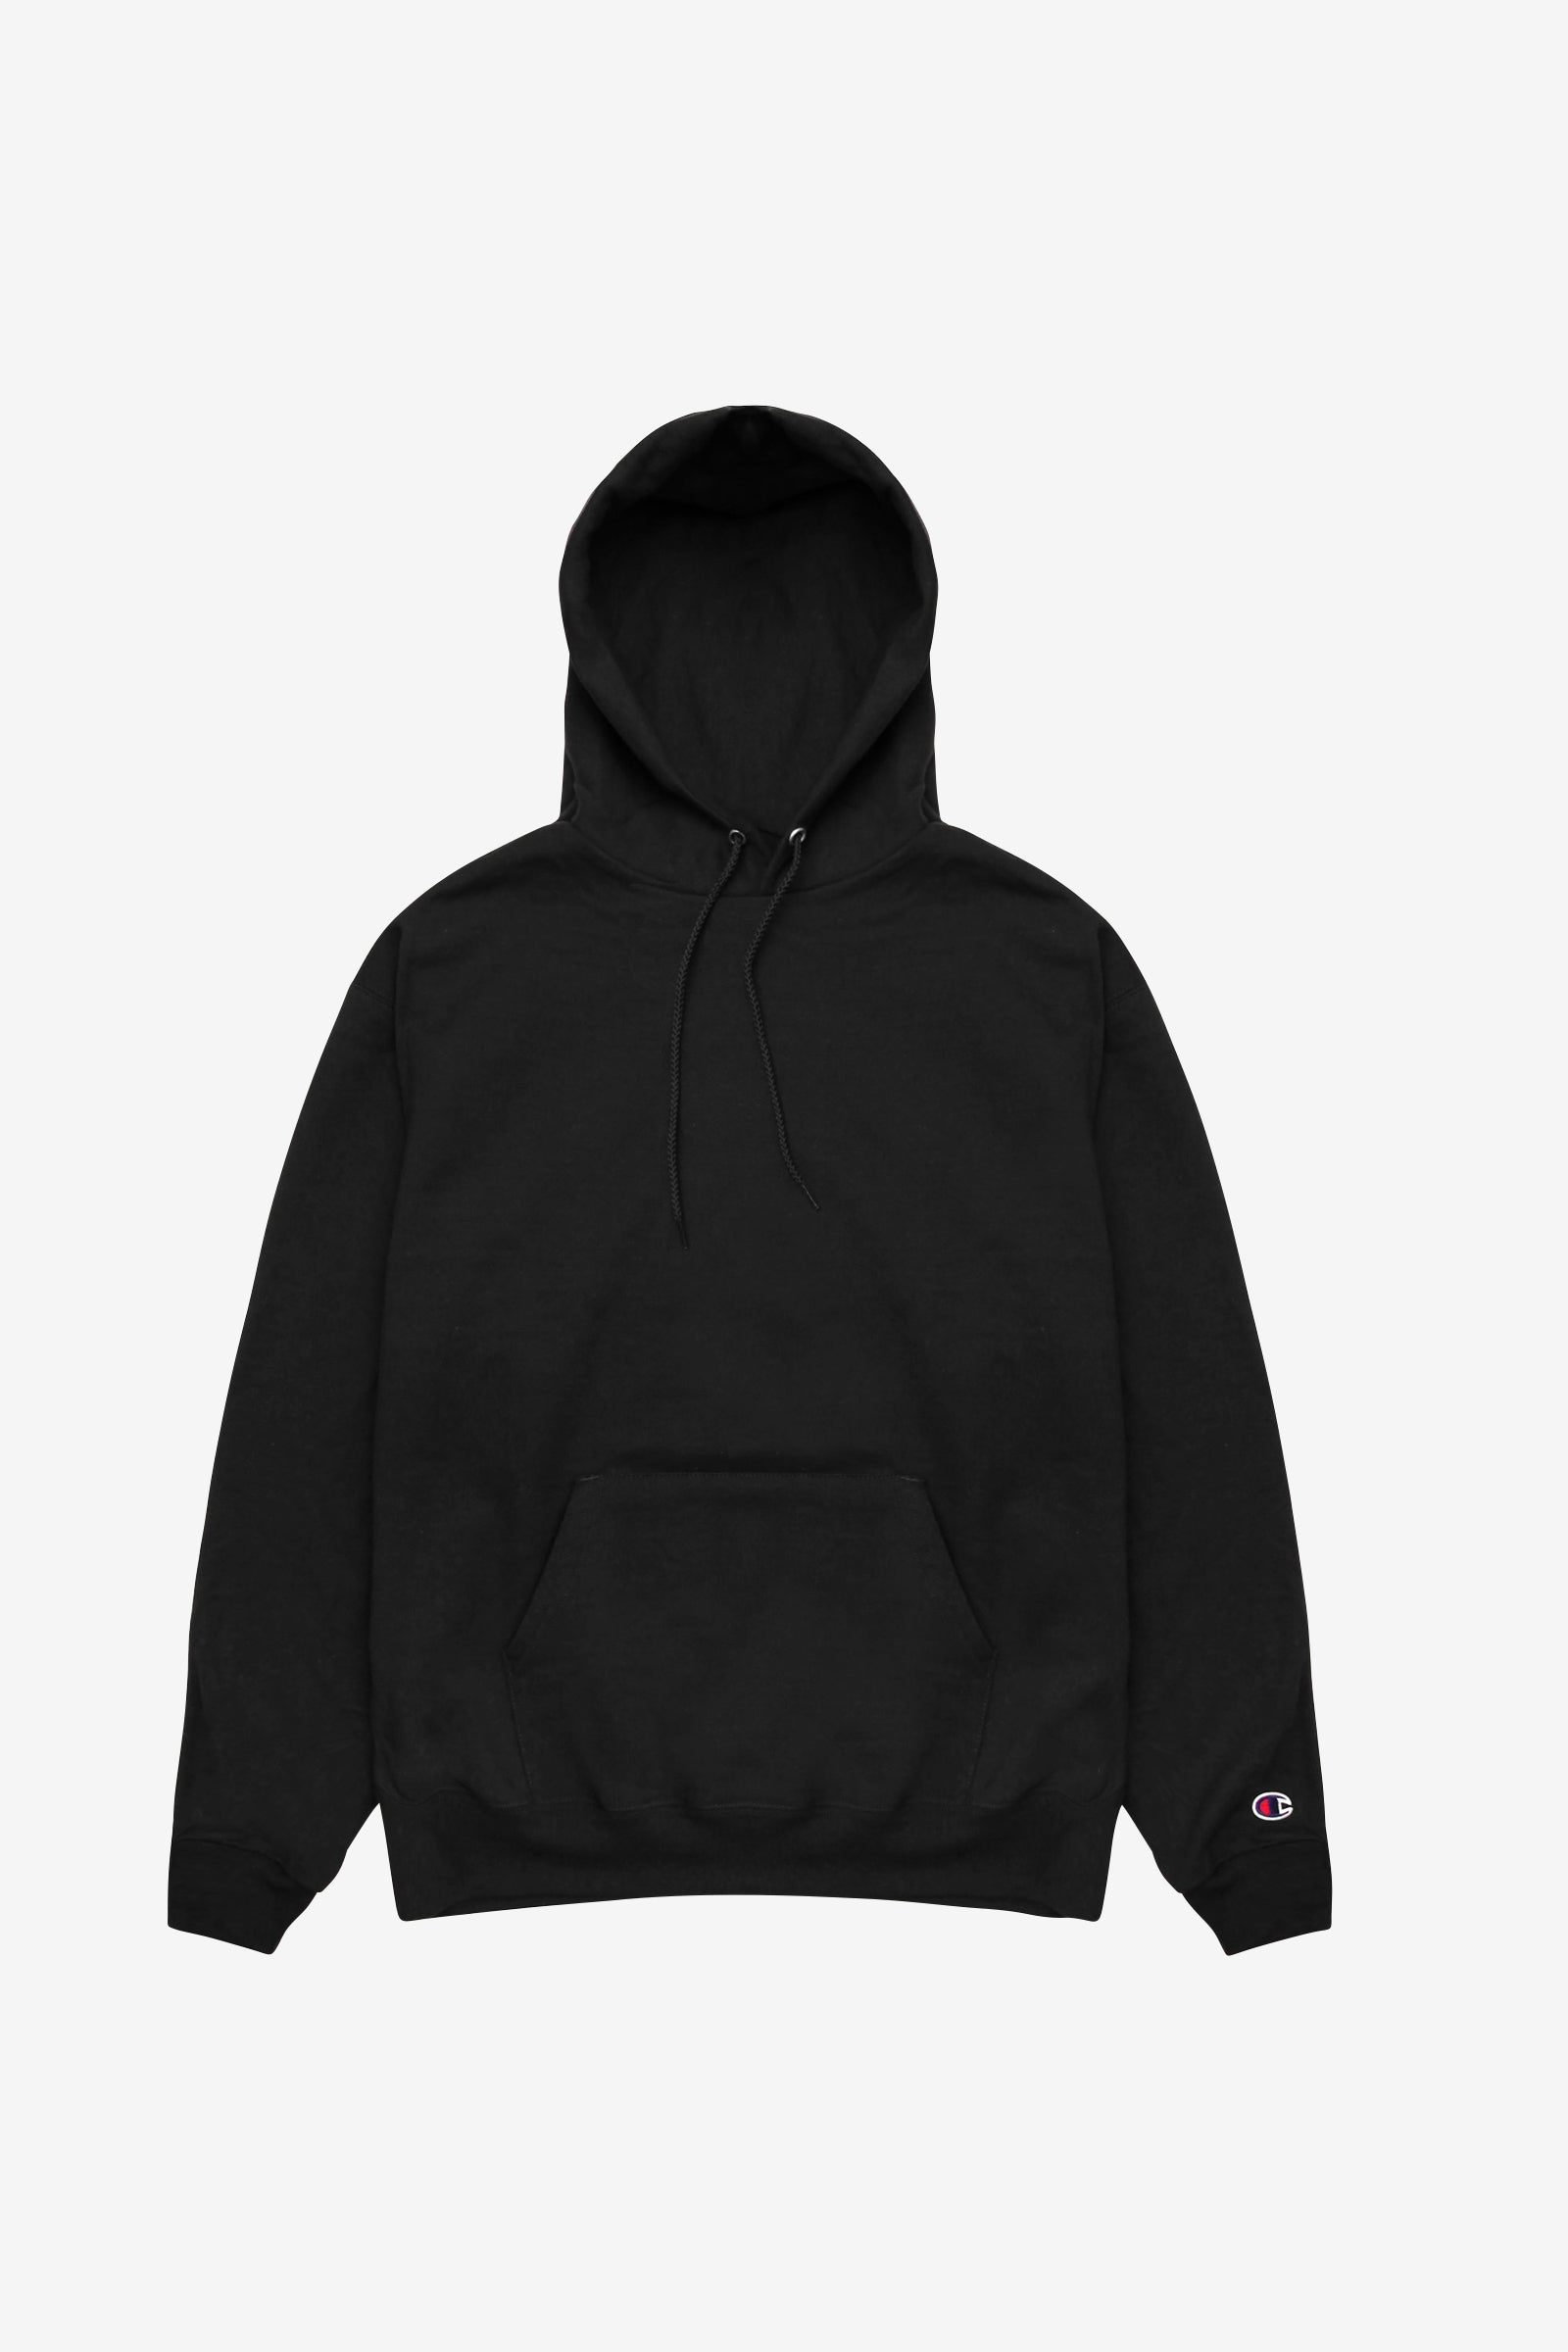 where to get a champion hoodie